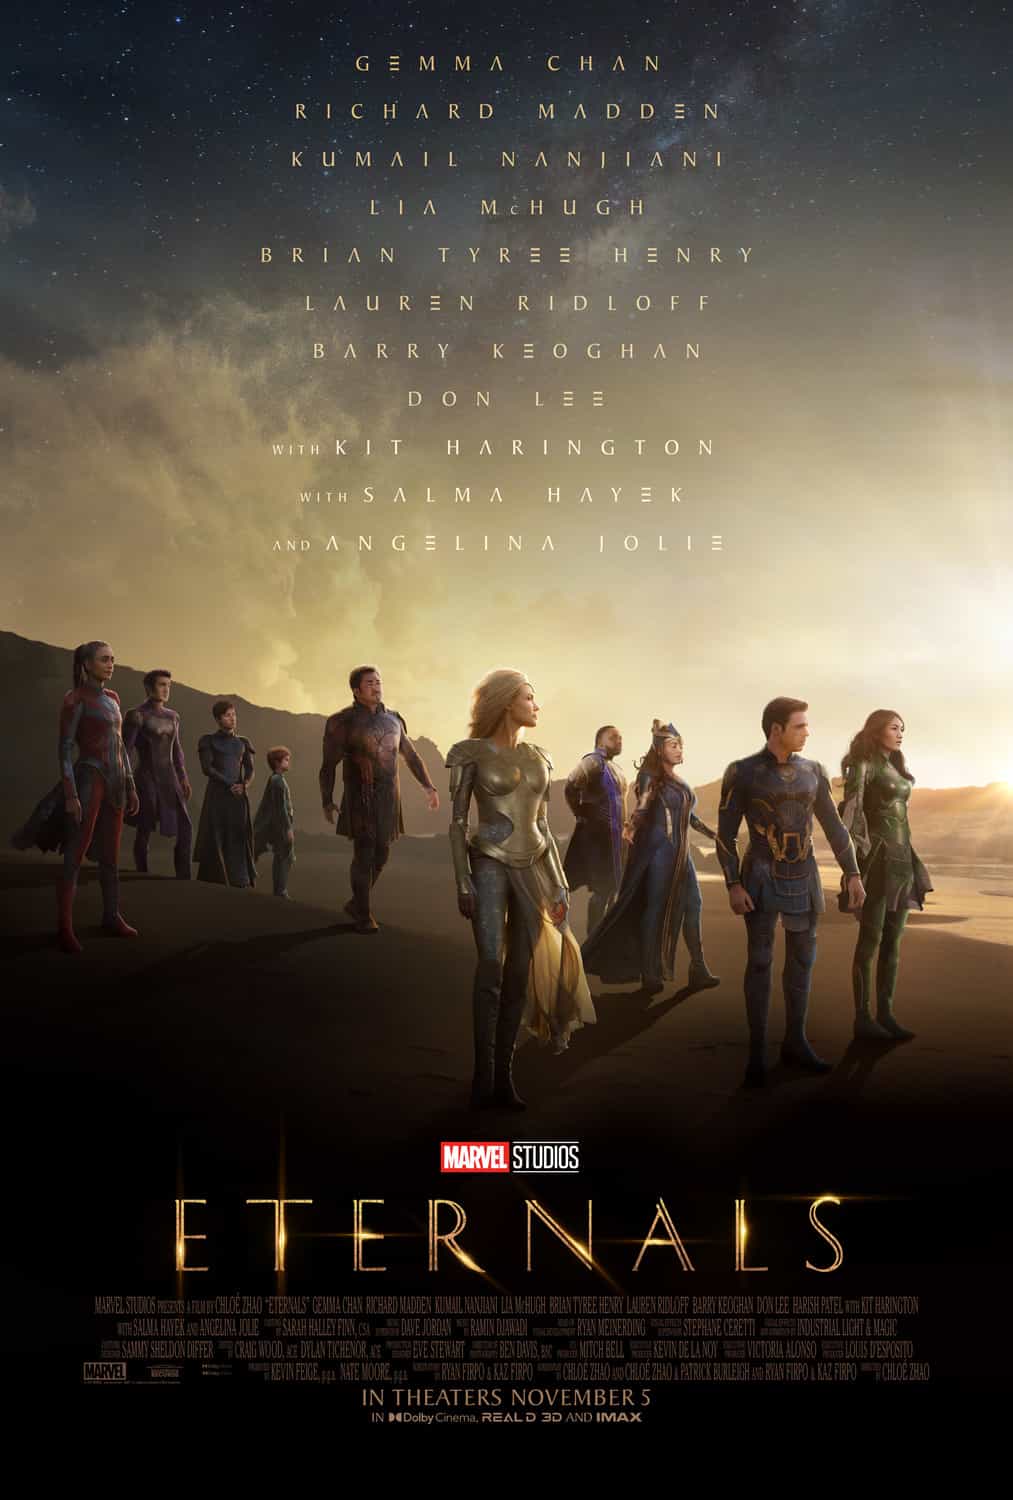 New trailer and poster for Marvels Eternals directed by Chloe Zhao